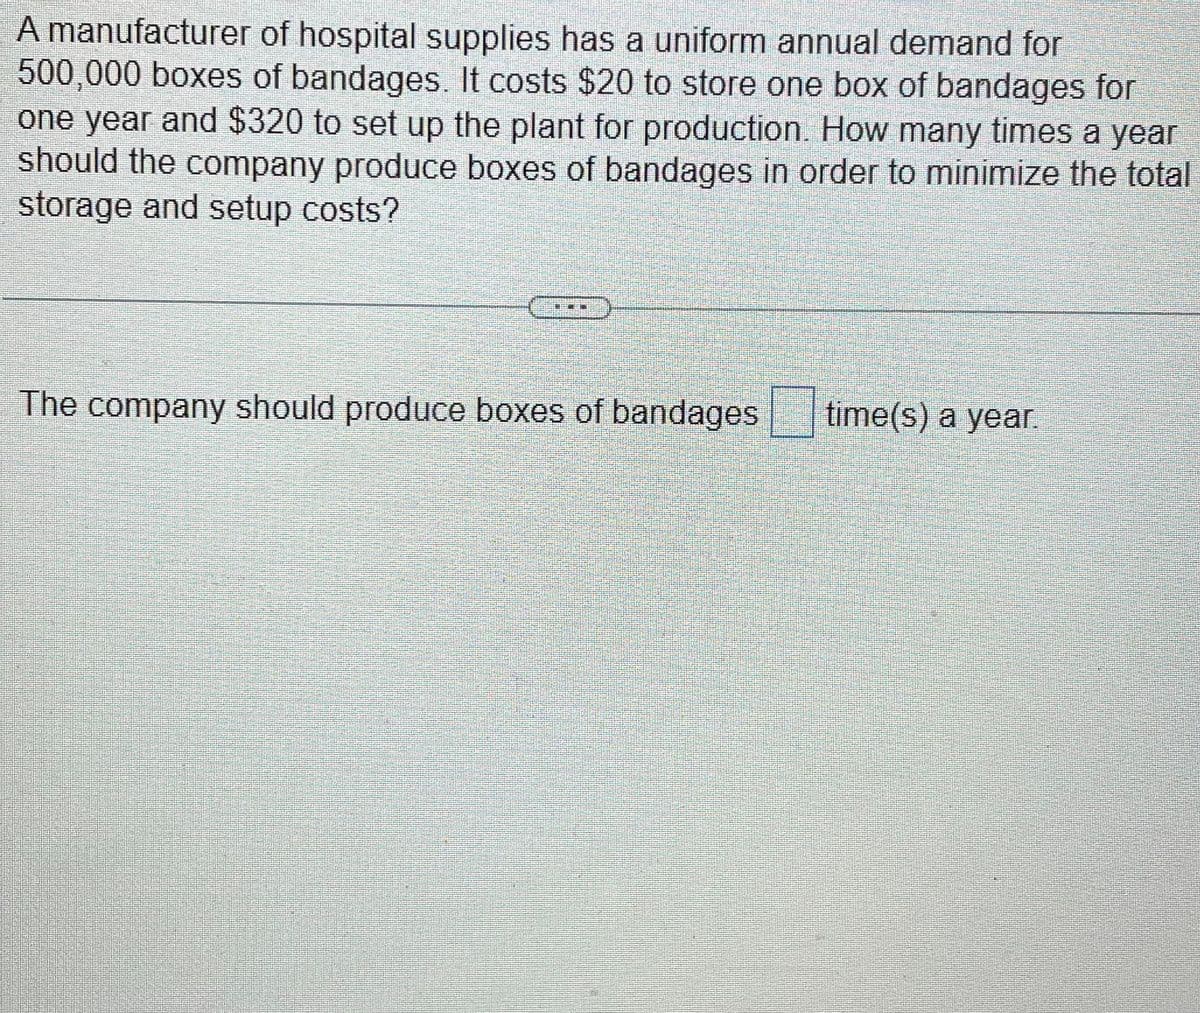 A manufacturer of hospital supplies has a uniform annual demand for
500,000 boxes of bandages. It costs $20 to store one box of bandages for
one year and $320 to set up the plant for production. How many times a year
should the company produce boxes of bandages in order to minimize the total
storage and setup costs?
The company should produce boxes of bandages
time(s) a year.